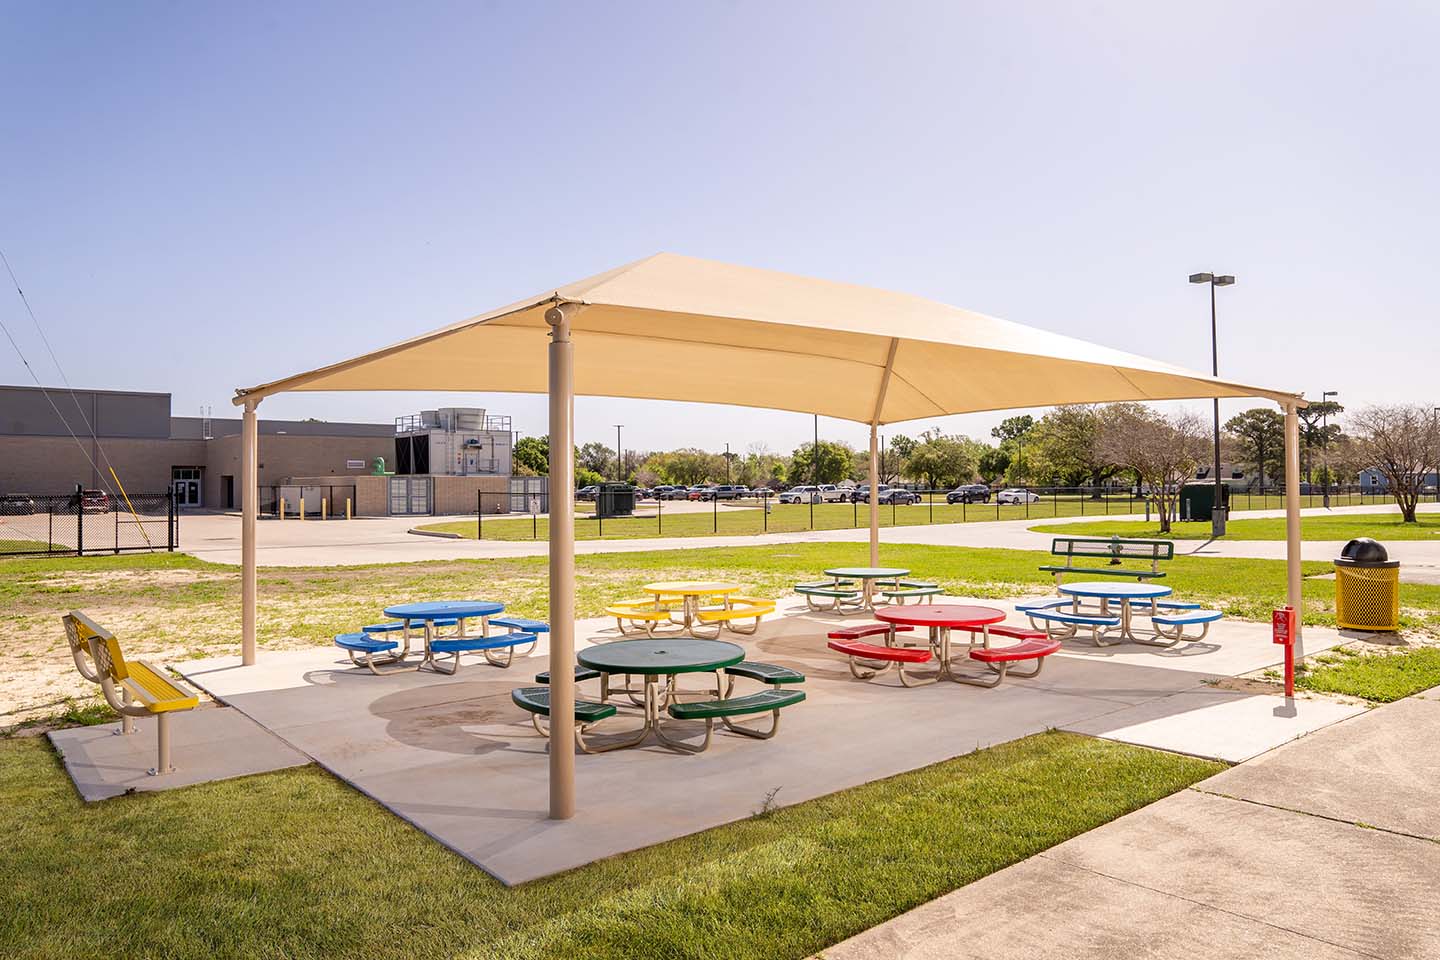 Wheatley School Texas Outdoor Classroom with multiple Regal Childrens Tables.